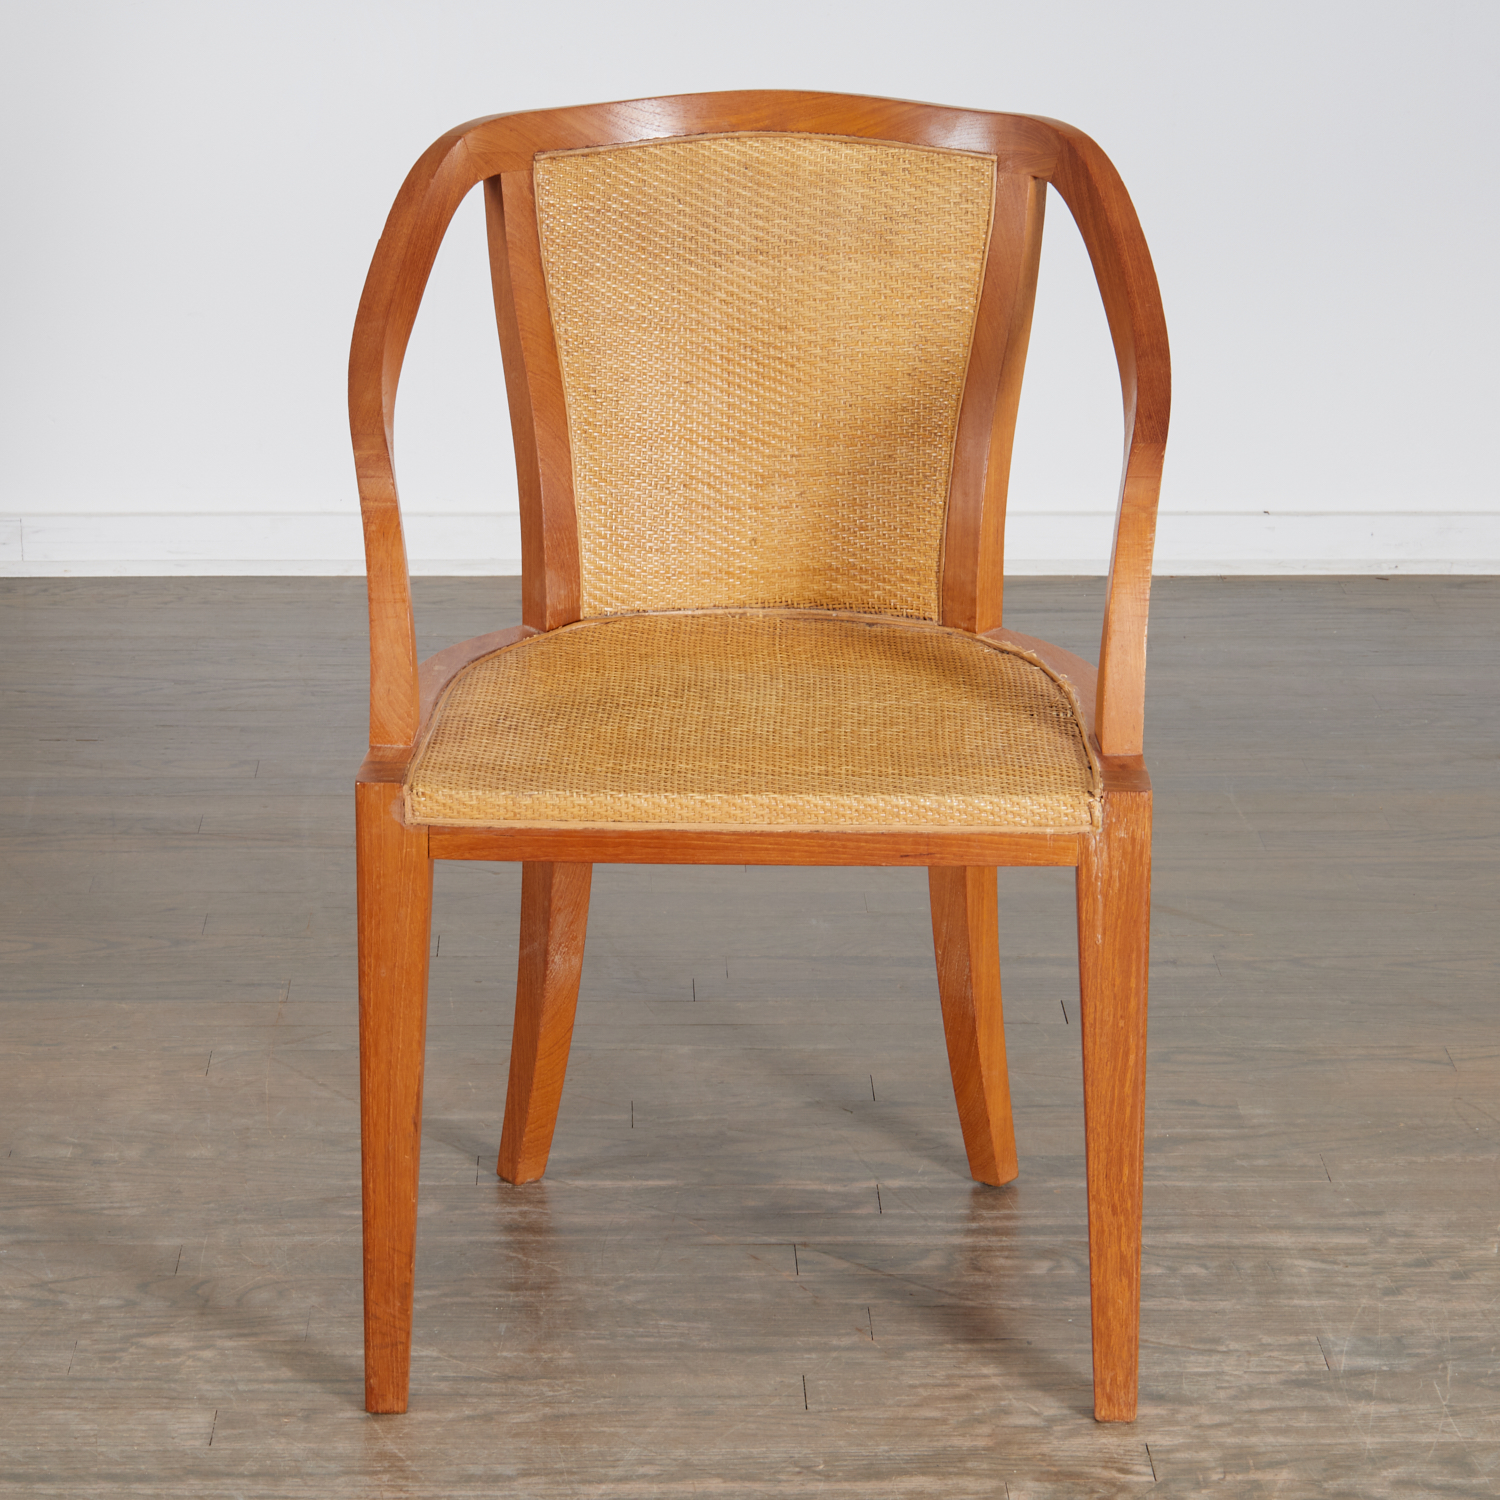 LOUIS CANE WOVEN RATTAN AND OAK 2bf916